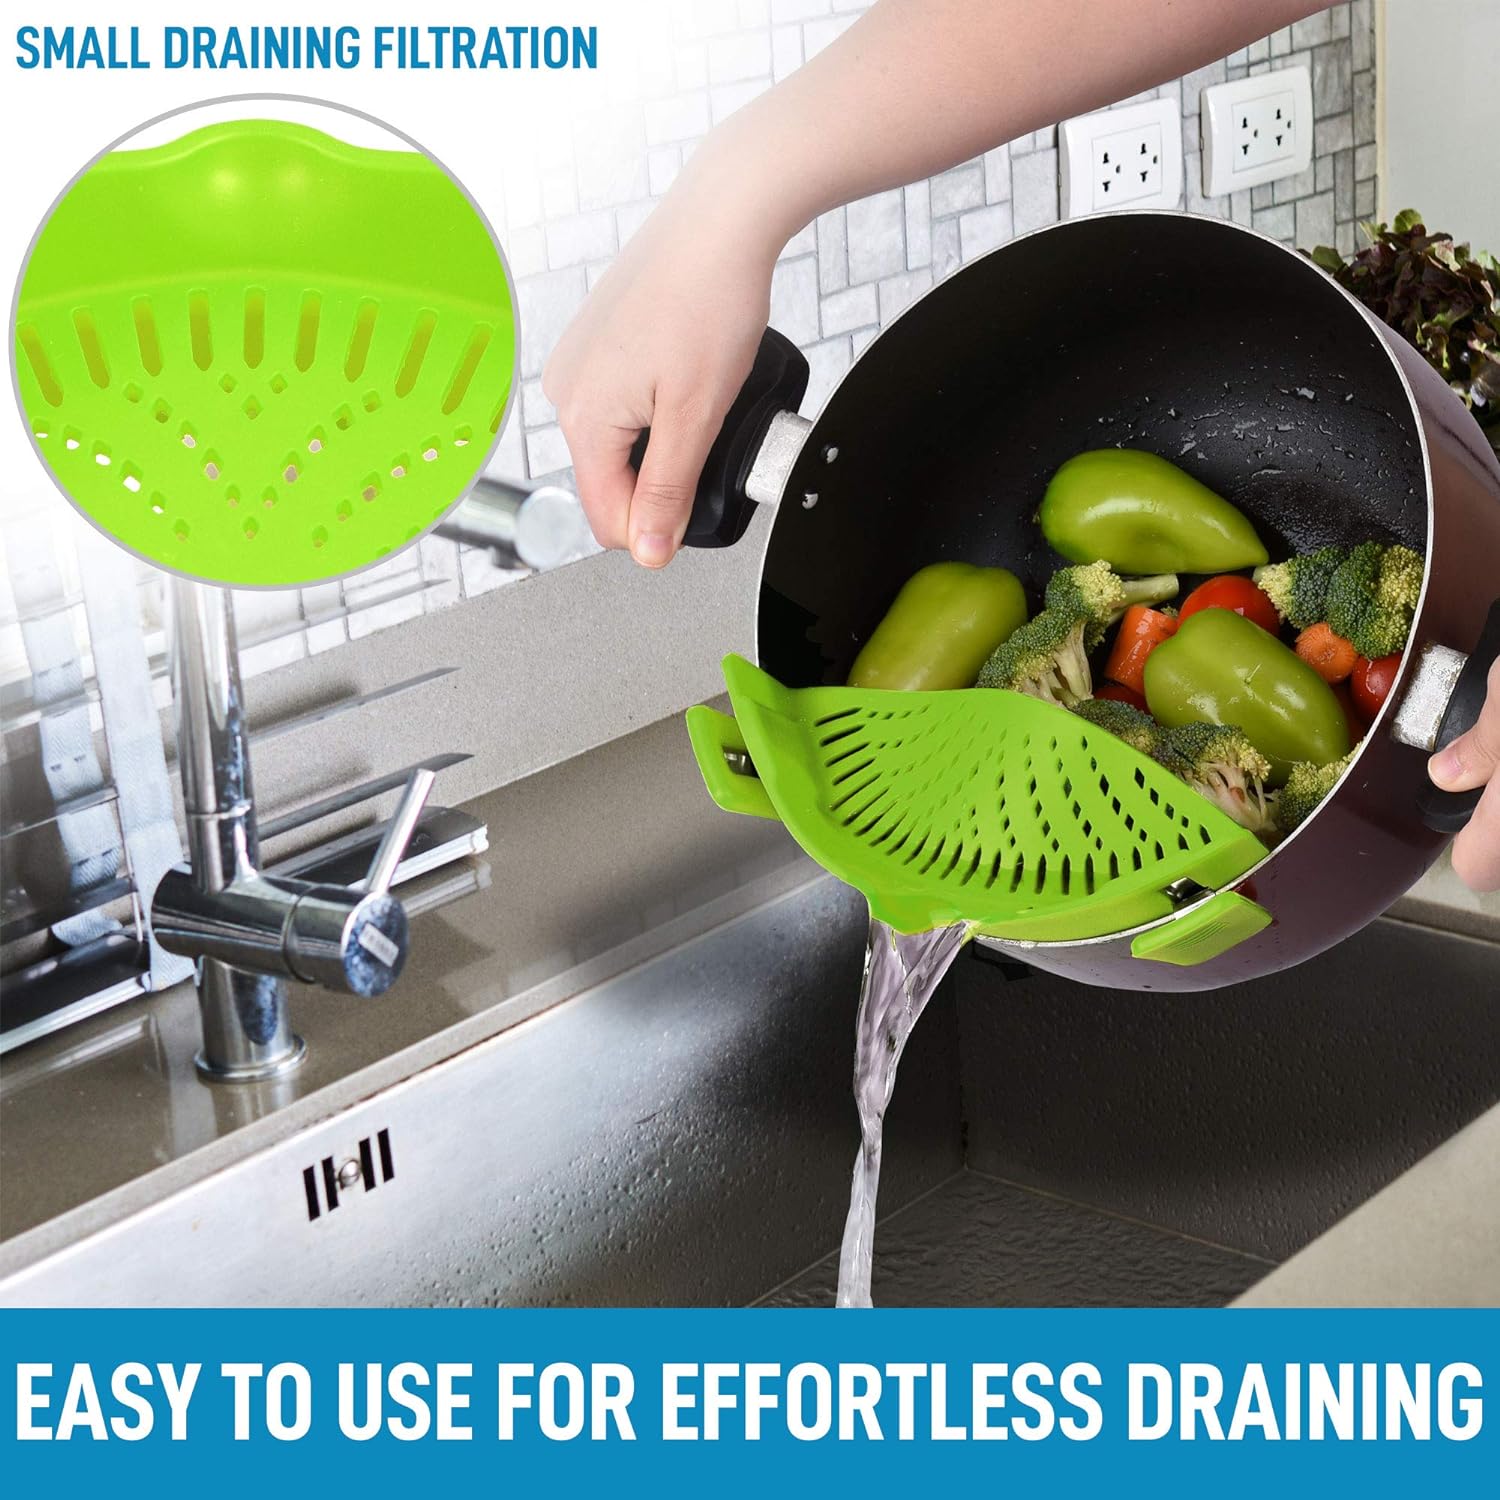 Effortless draining with Silicone Pot Strainer